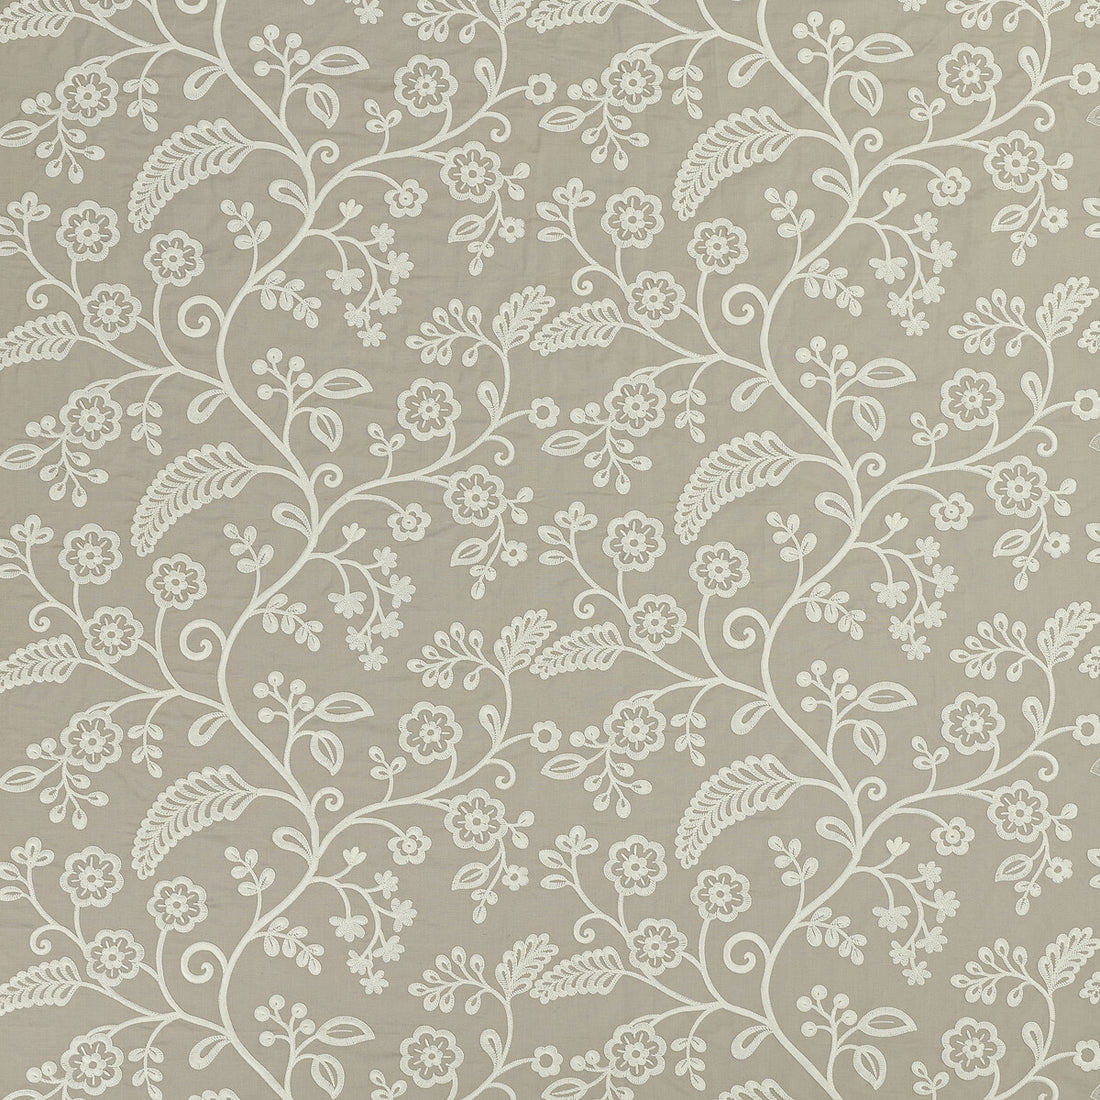 Denbury fabric in linen color - pattern PF50368.110.0 - by Baker Lifestyle in the Denbury collection